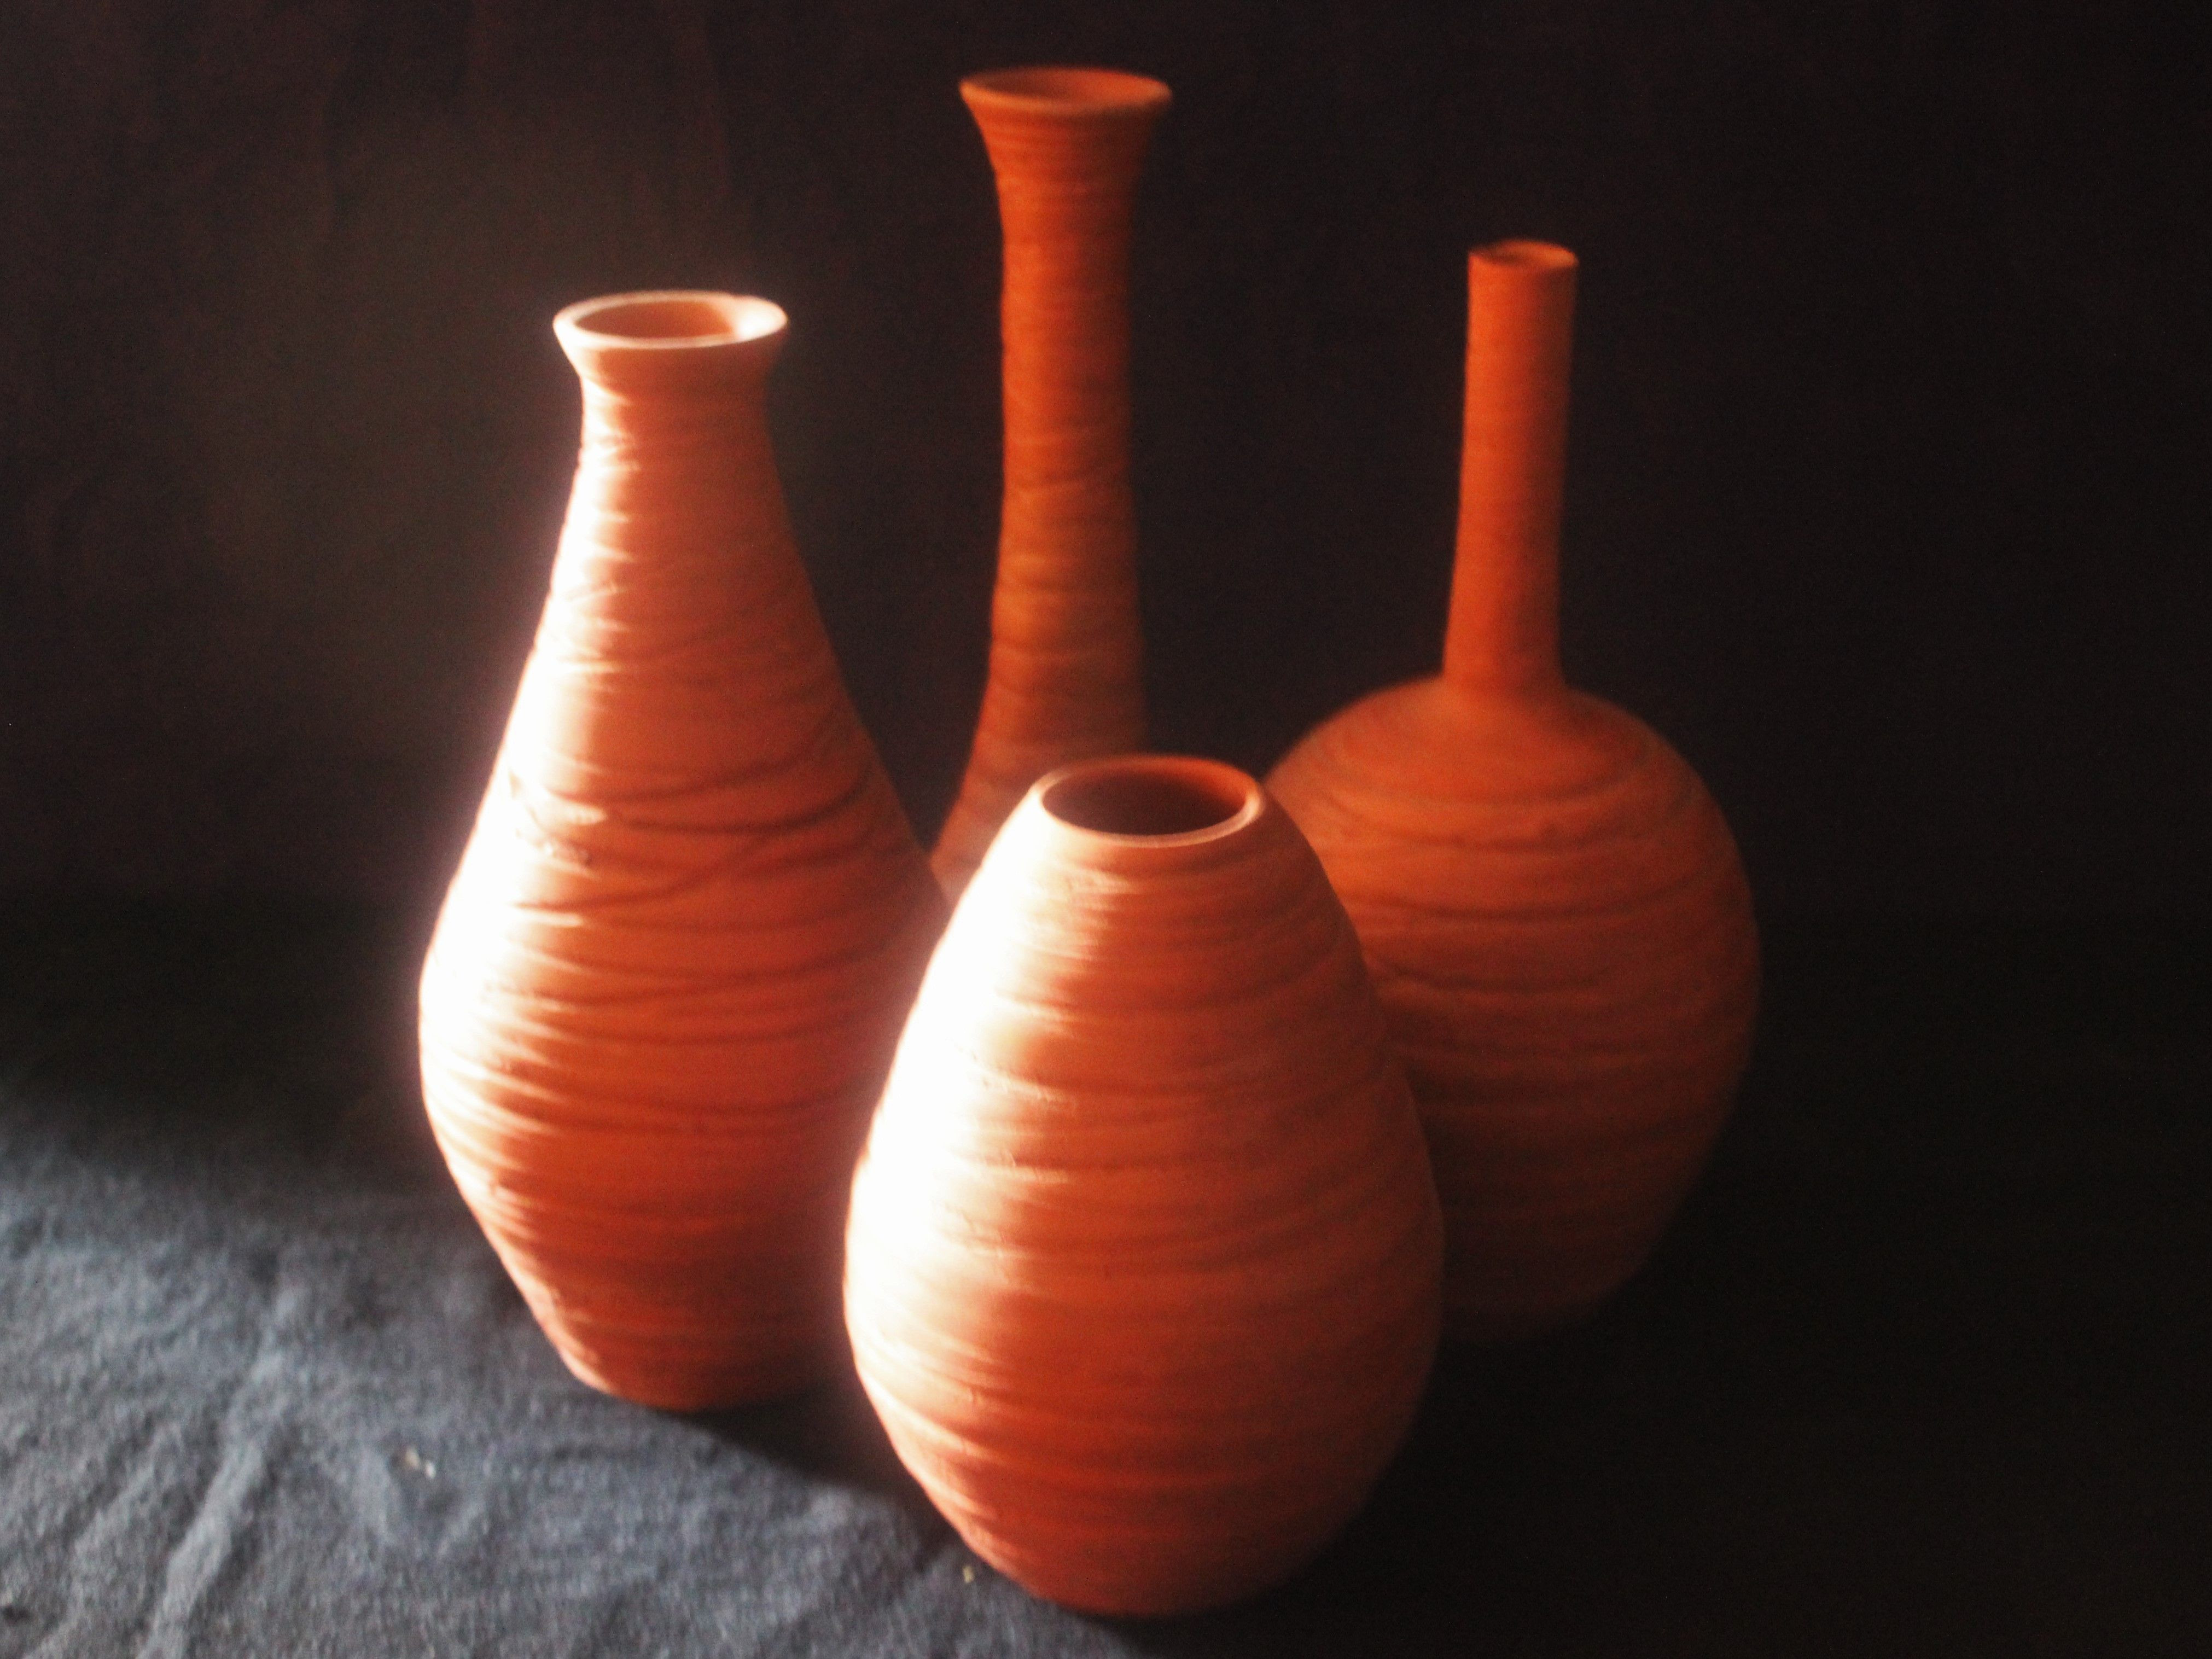 11 Trendy White Terracotta Vase 2024 free download white terracotta vase of terracotta vases set of 4 pcs by artesania the clay studio price within terracotta vases set of 4 pcs by artesania the clay studio price rs 3250 plus shipping